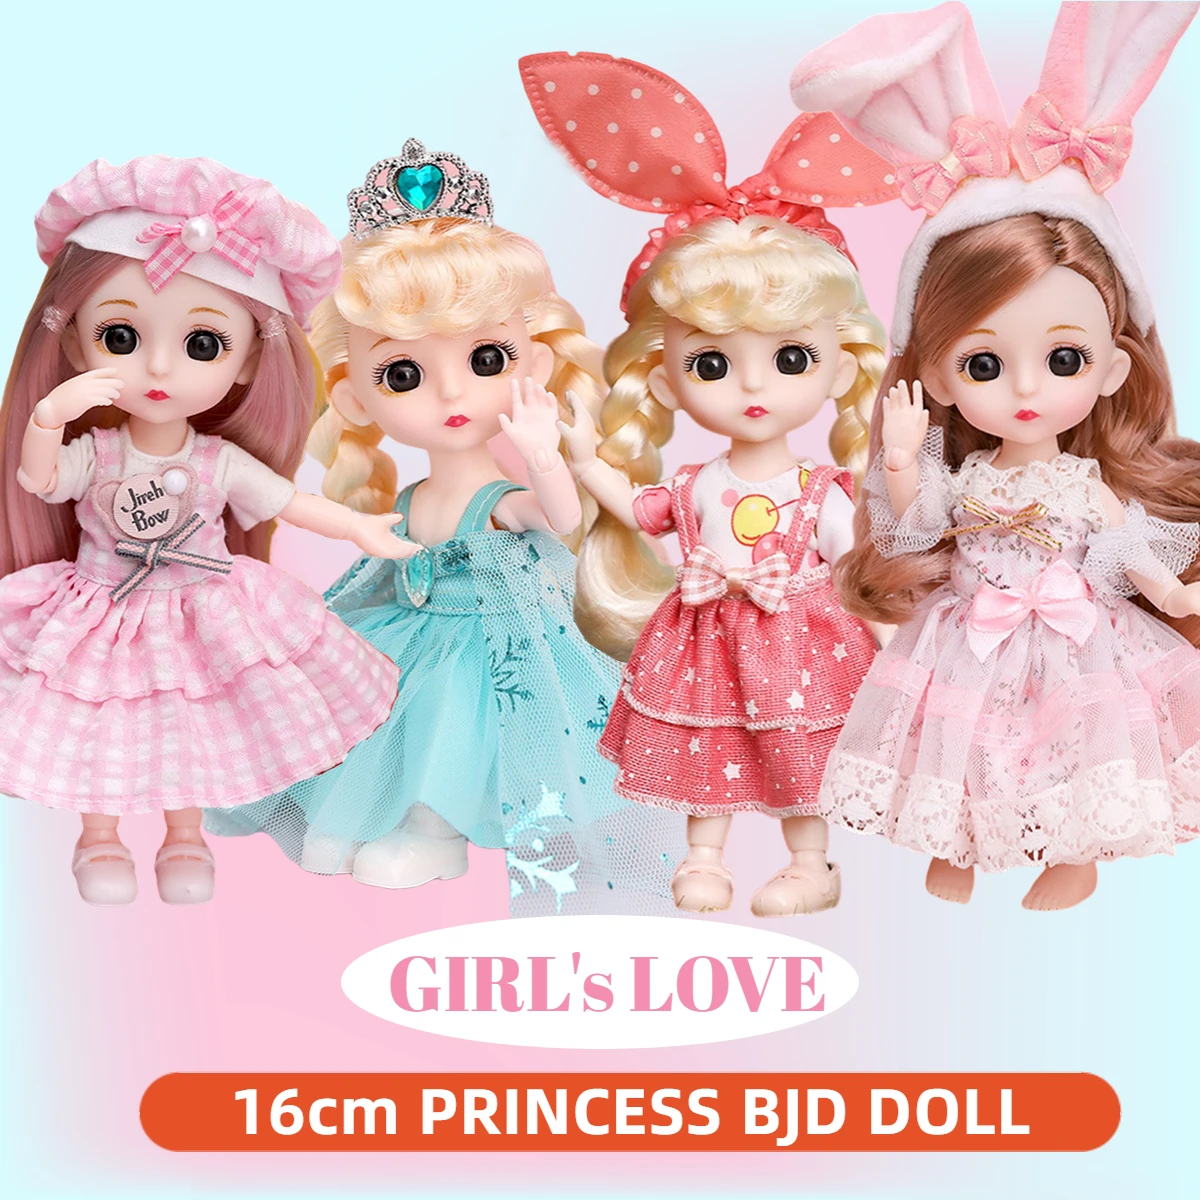 

Movable Princess BJD Figure Doll with Clothes and Shoes, 16cm Cute Face Big Eyes 1/12 Scale DIY 13 Joints Sweet Gift Girl Toy